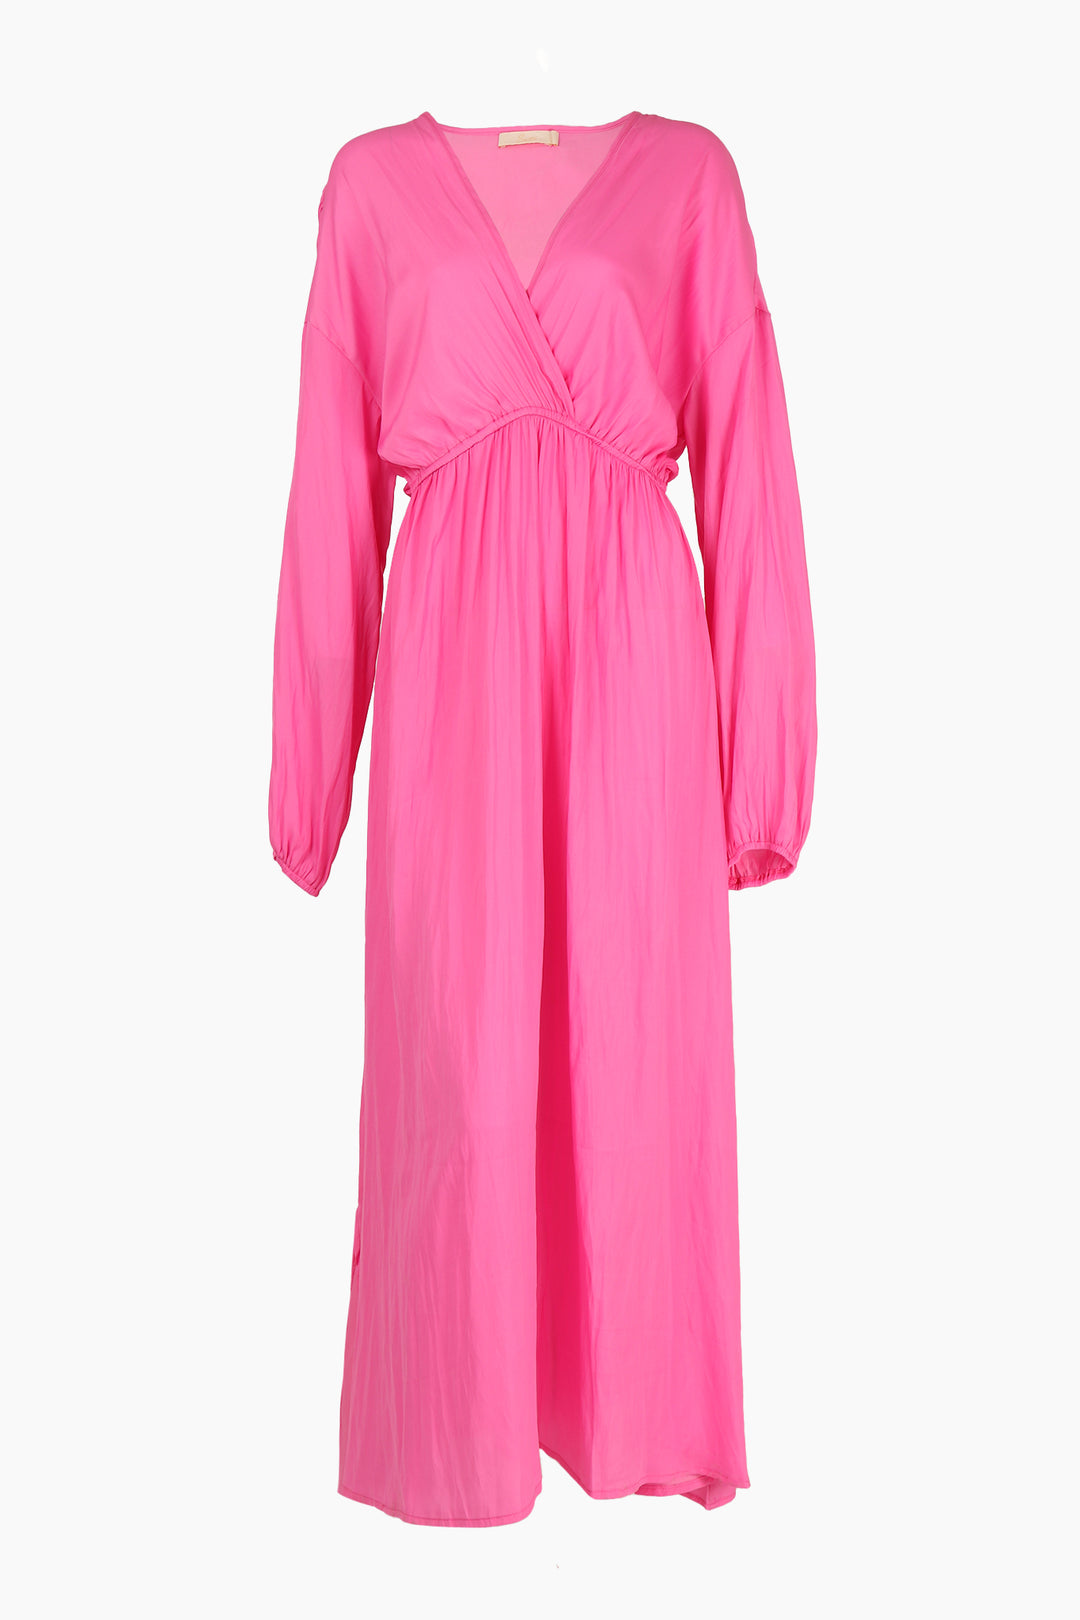 long sleeved pink faux wrap maxi dress